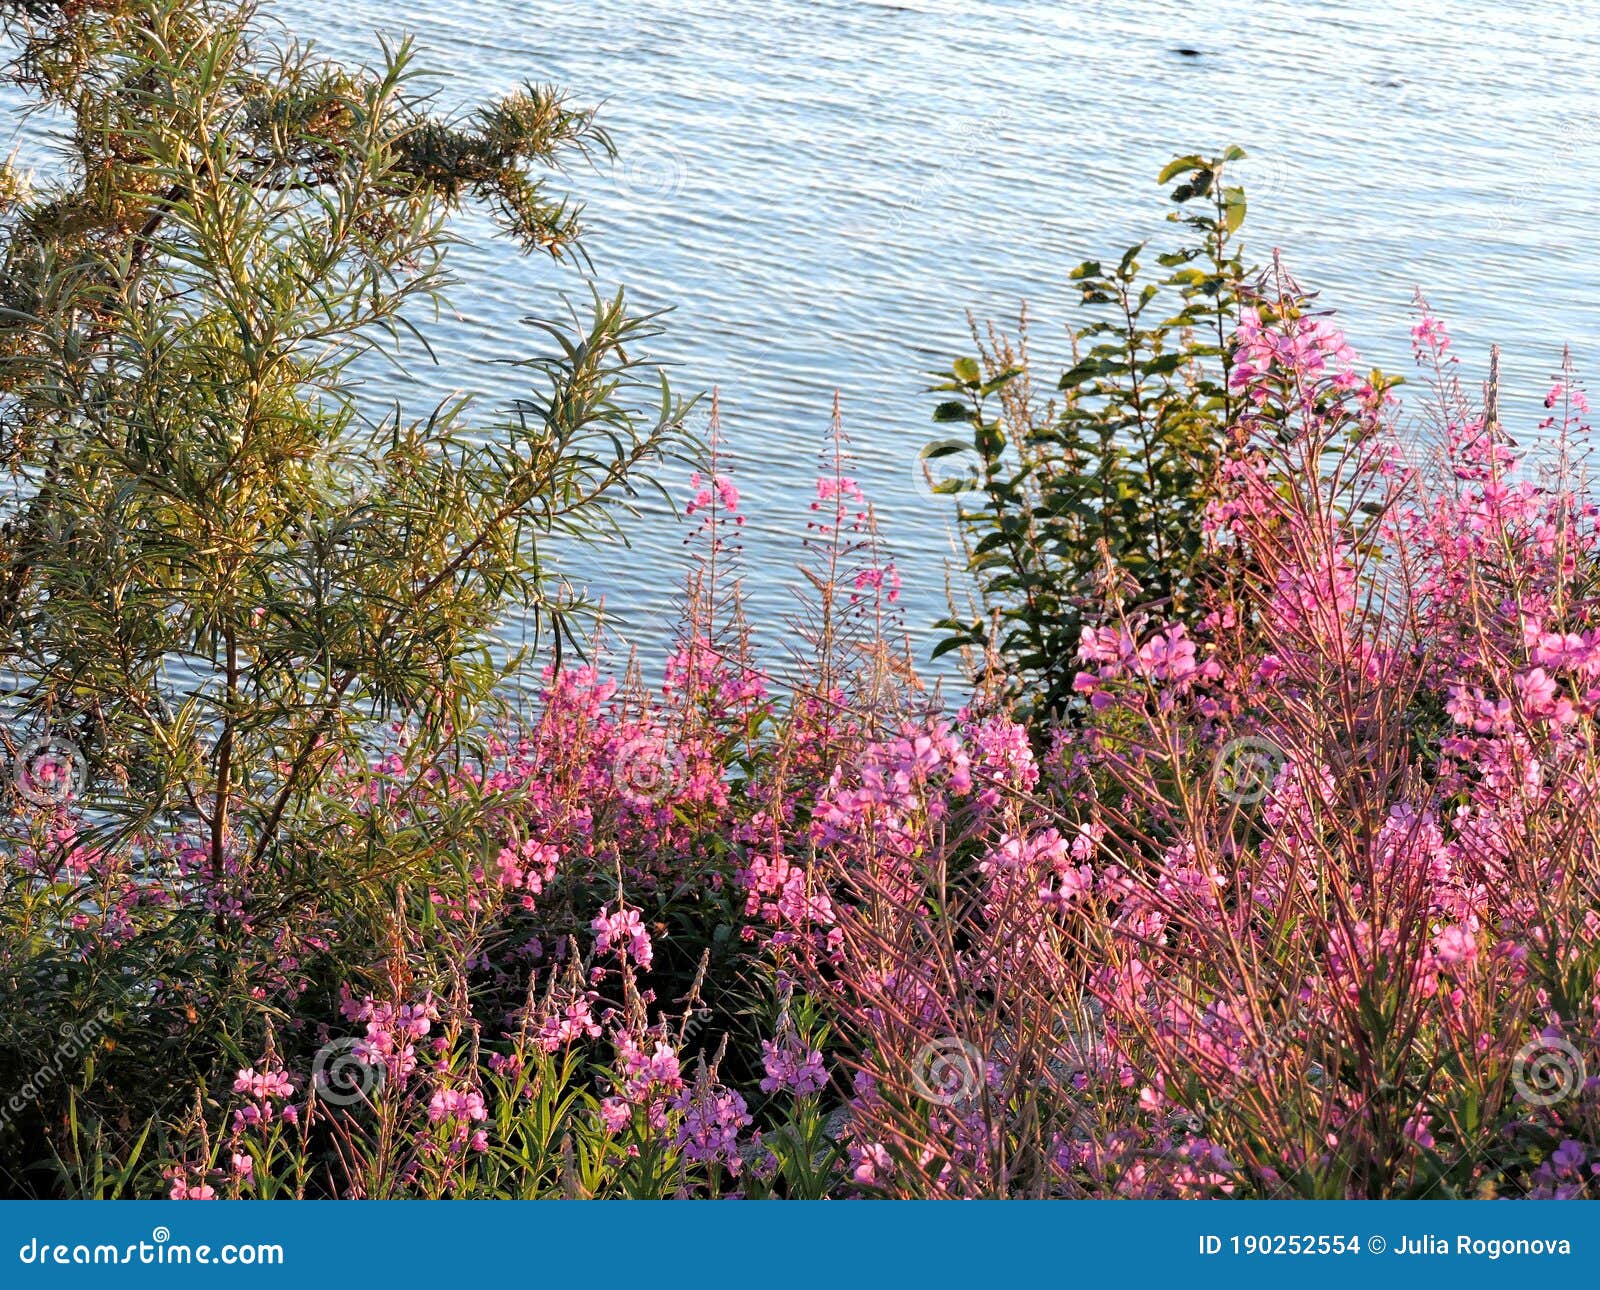 Bushes and Flowers Near the Water in Summer Oulu, Finland Stock Photo ...